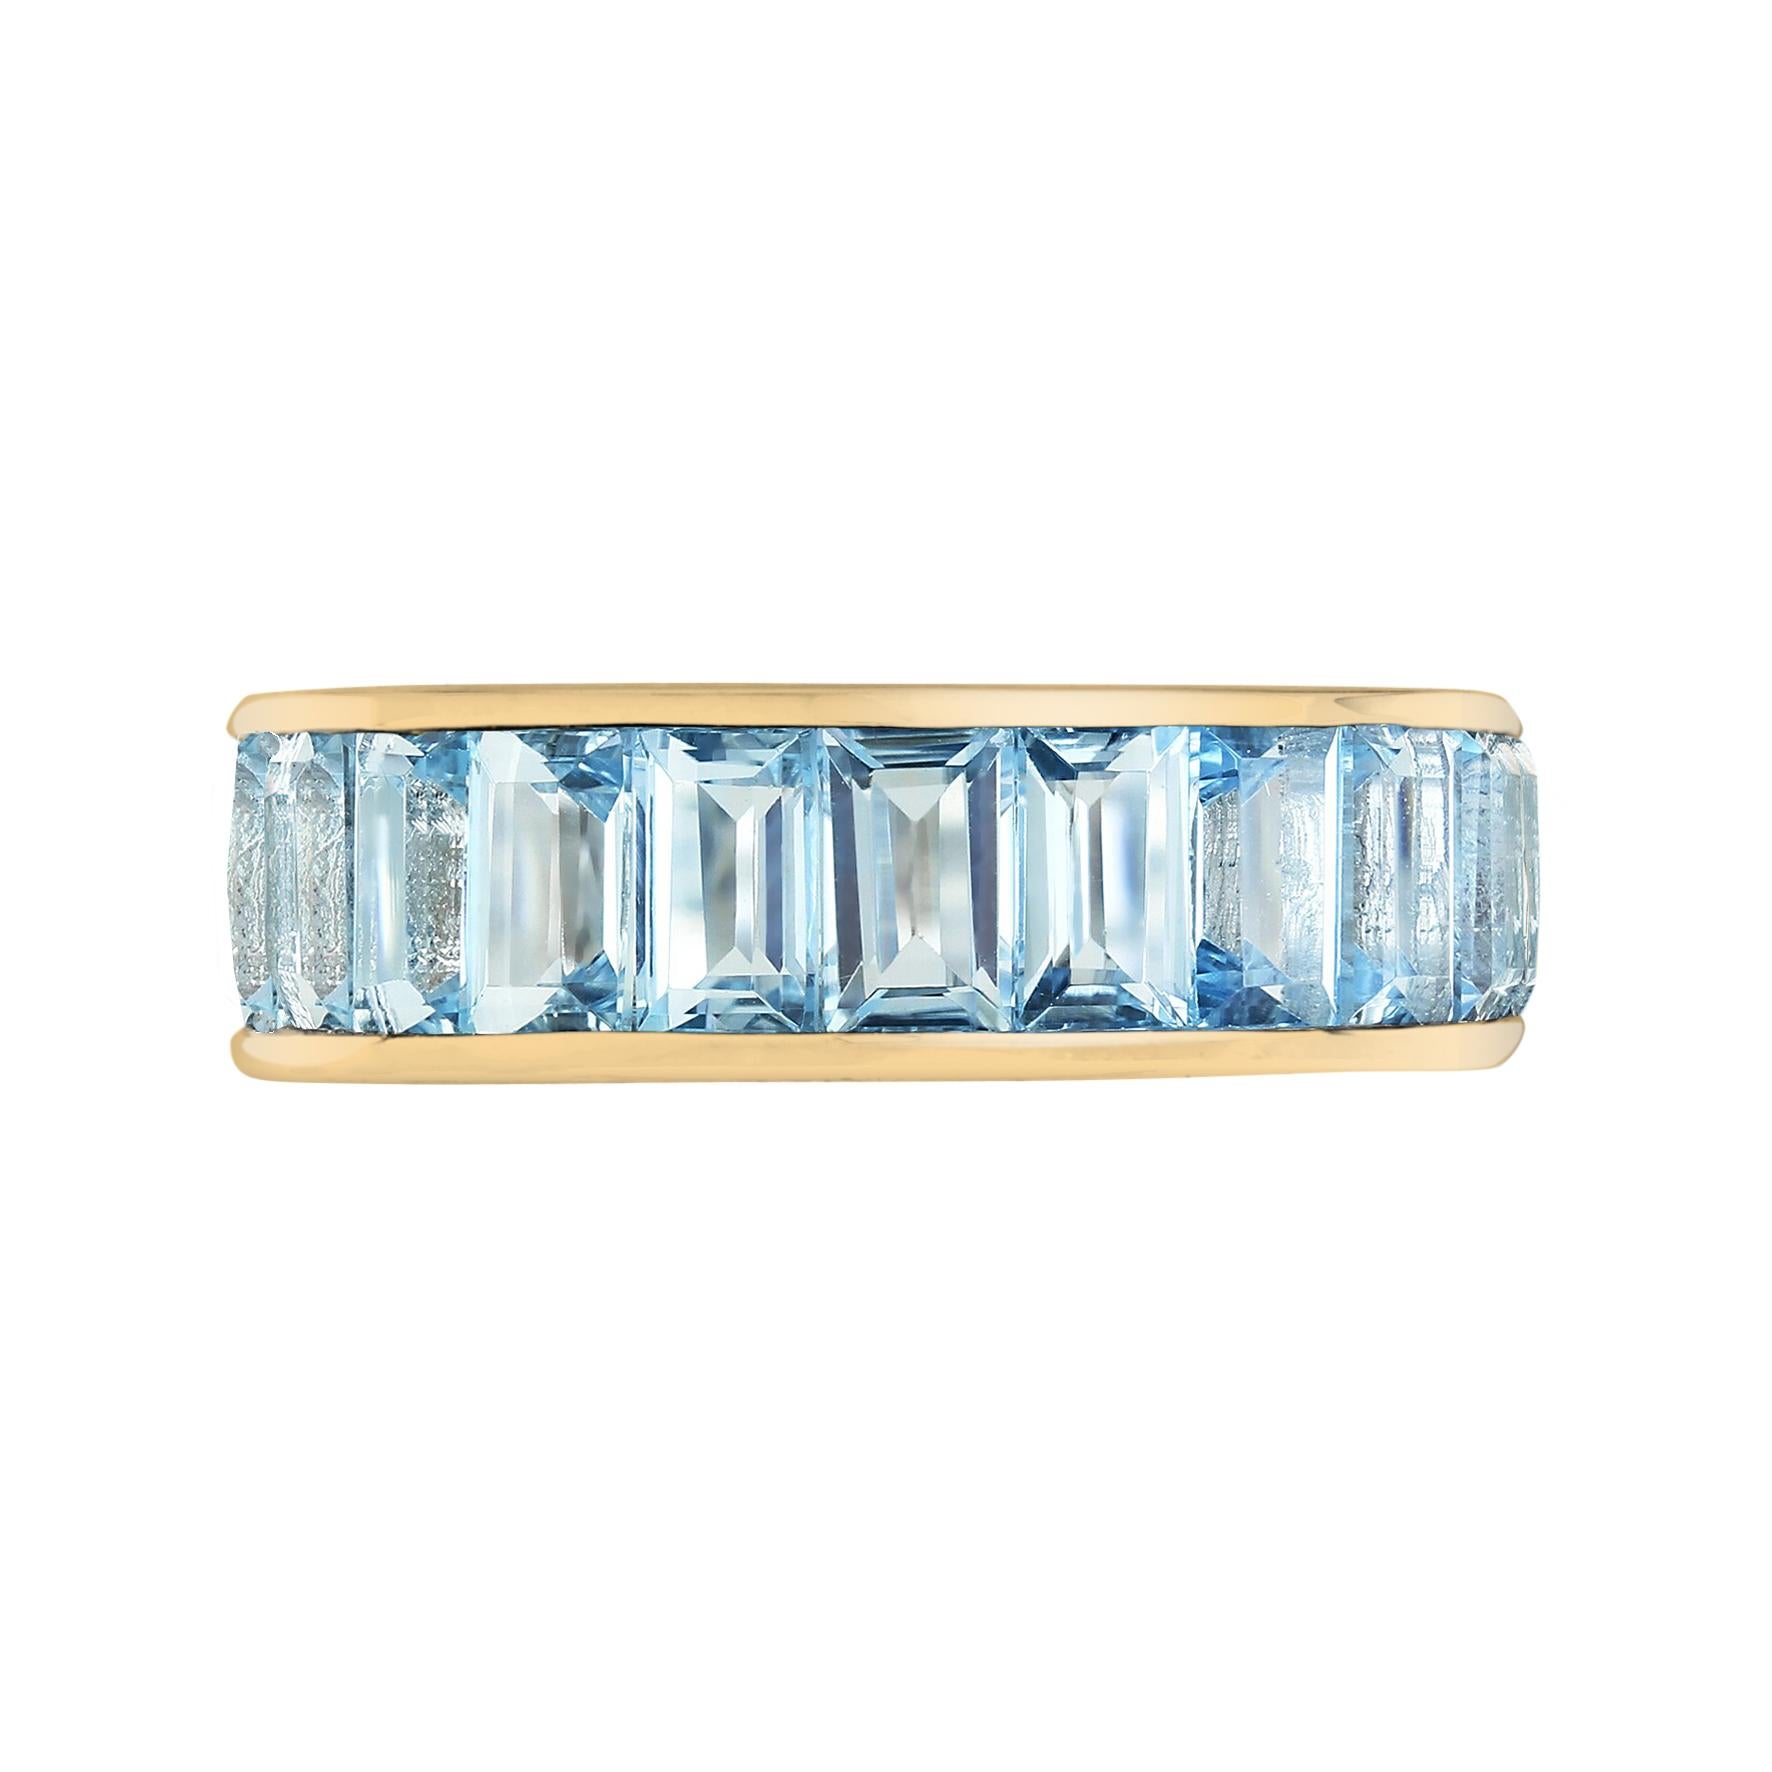 A unisex ring that can truly amp up the style of any outfit!

This blue topaz eternity band is the perfect addition to your collection. Twenty-two baguette-cut blue topaz are vertically set in 18k yellow gold. The ring measures 6 mm. wide so it